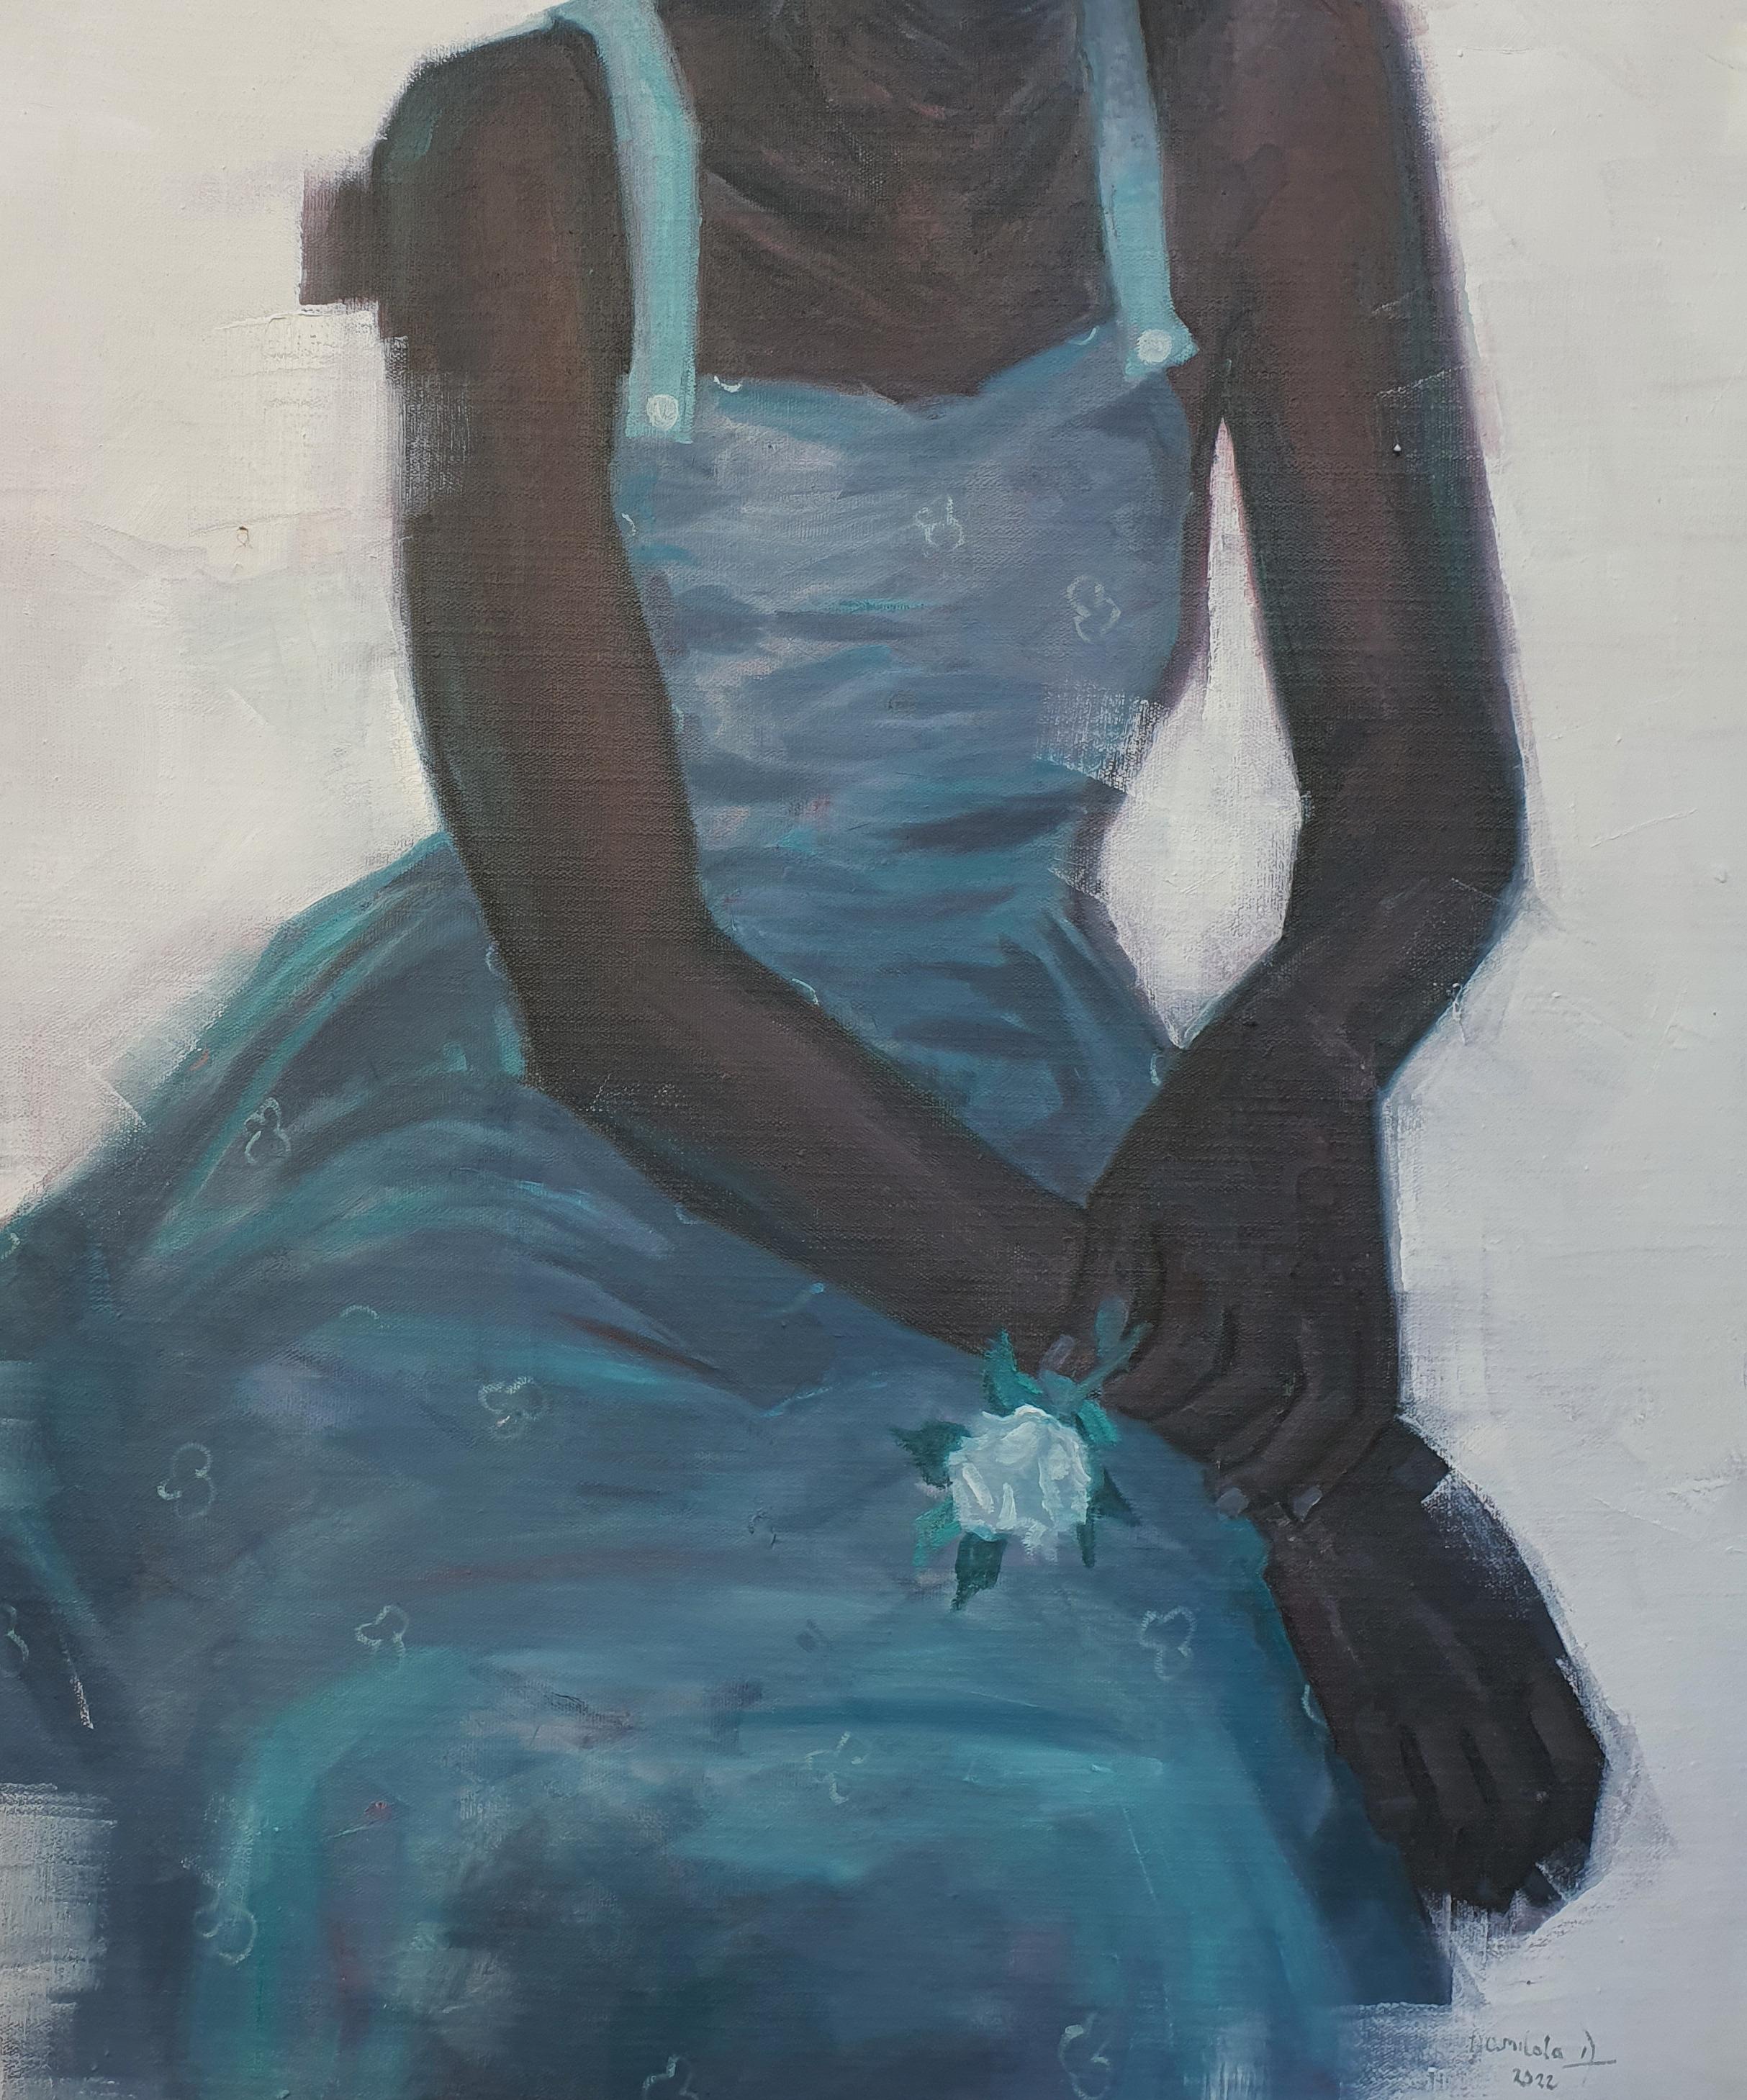 The Lady with a Rose 4 - Painting by Ajegbomogun Damilola